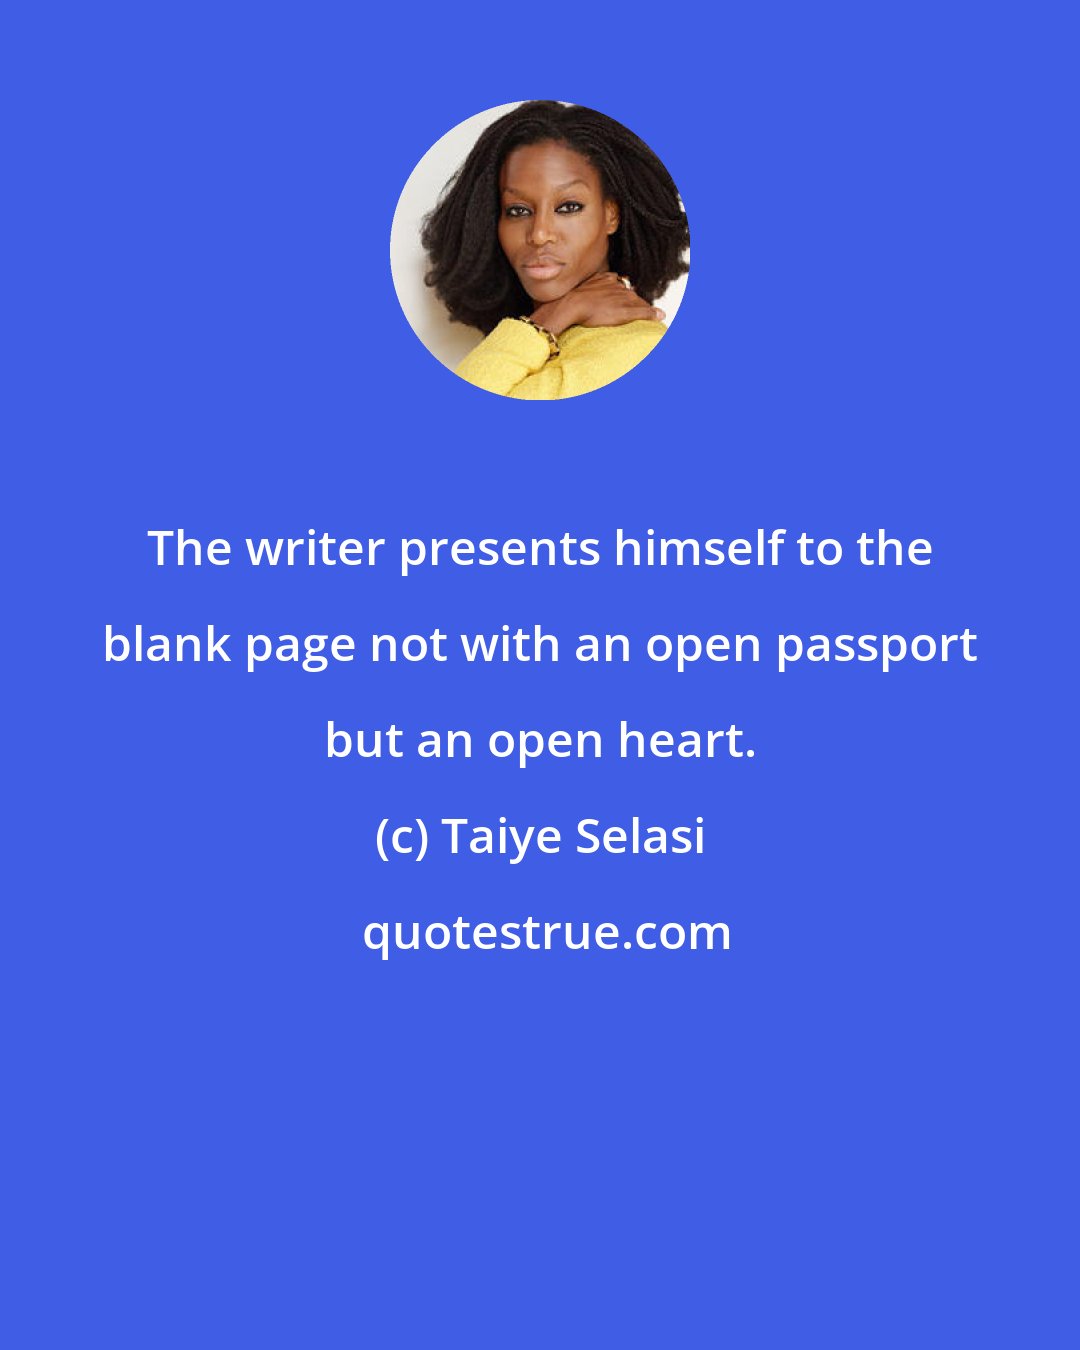 Taiye Selasi: The writer presents himself to the blank page not with an open passport but an open heart.